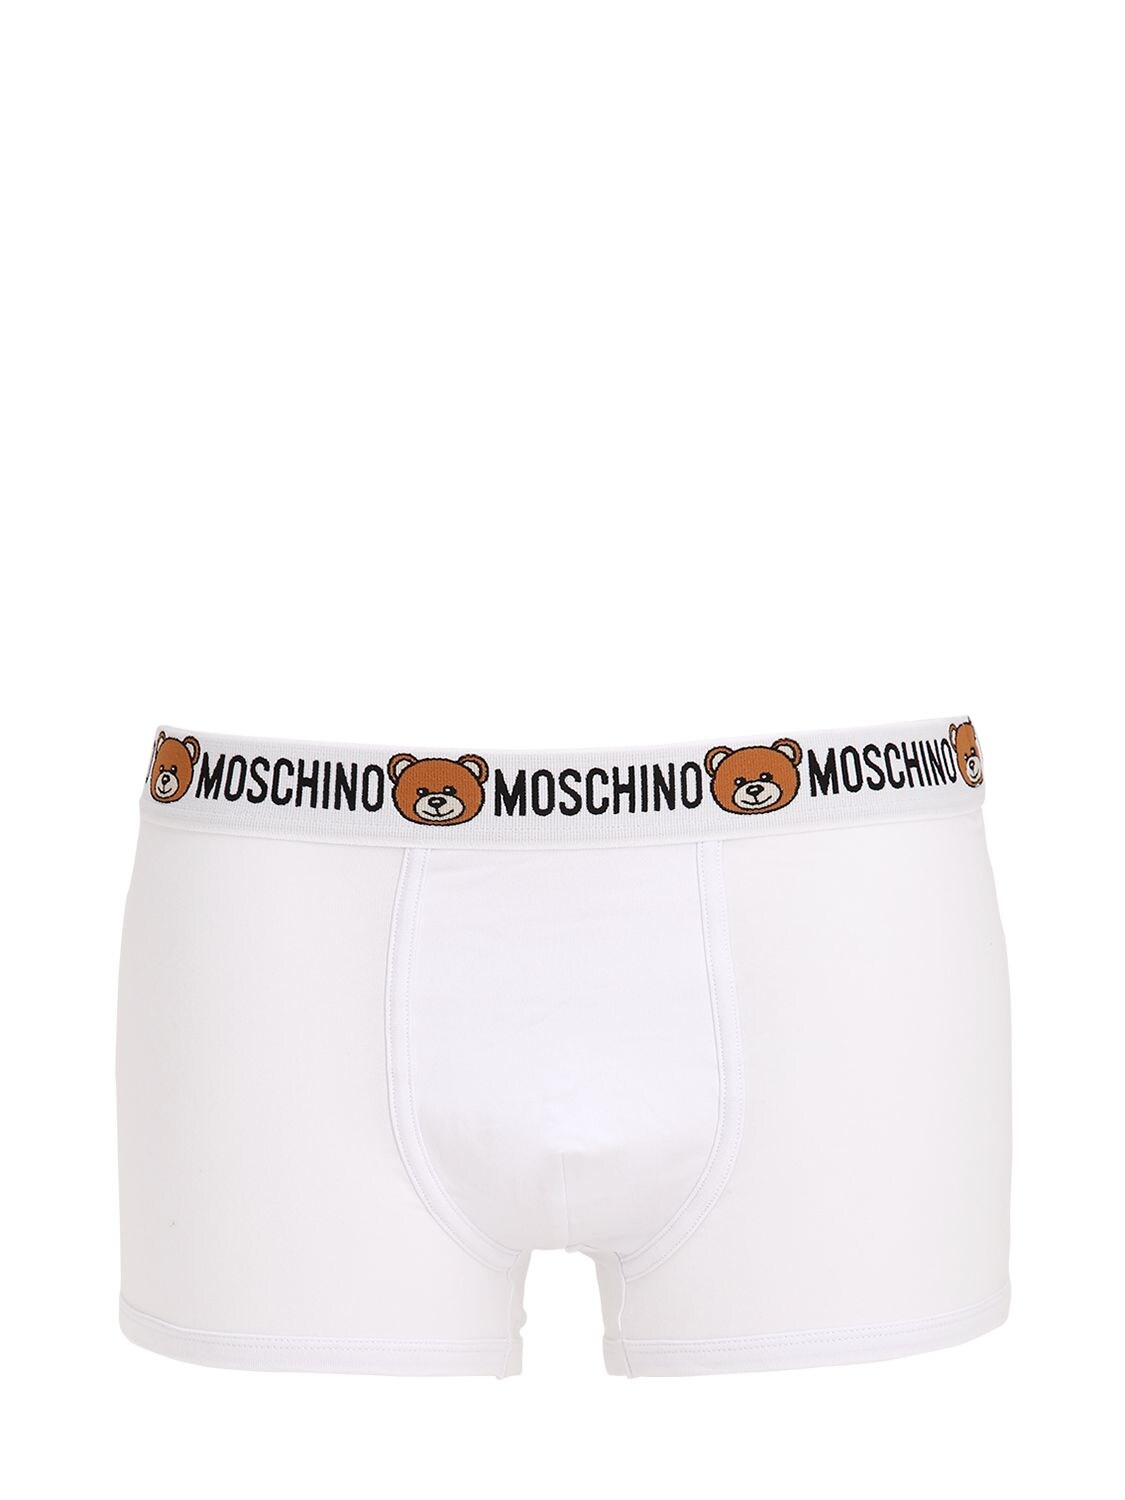 Mens Clothing Underwear Boxers briefs Moschino Pack Of 2 Logo Cotton Jersey Briefs in White for Men 